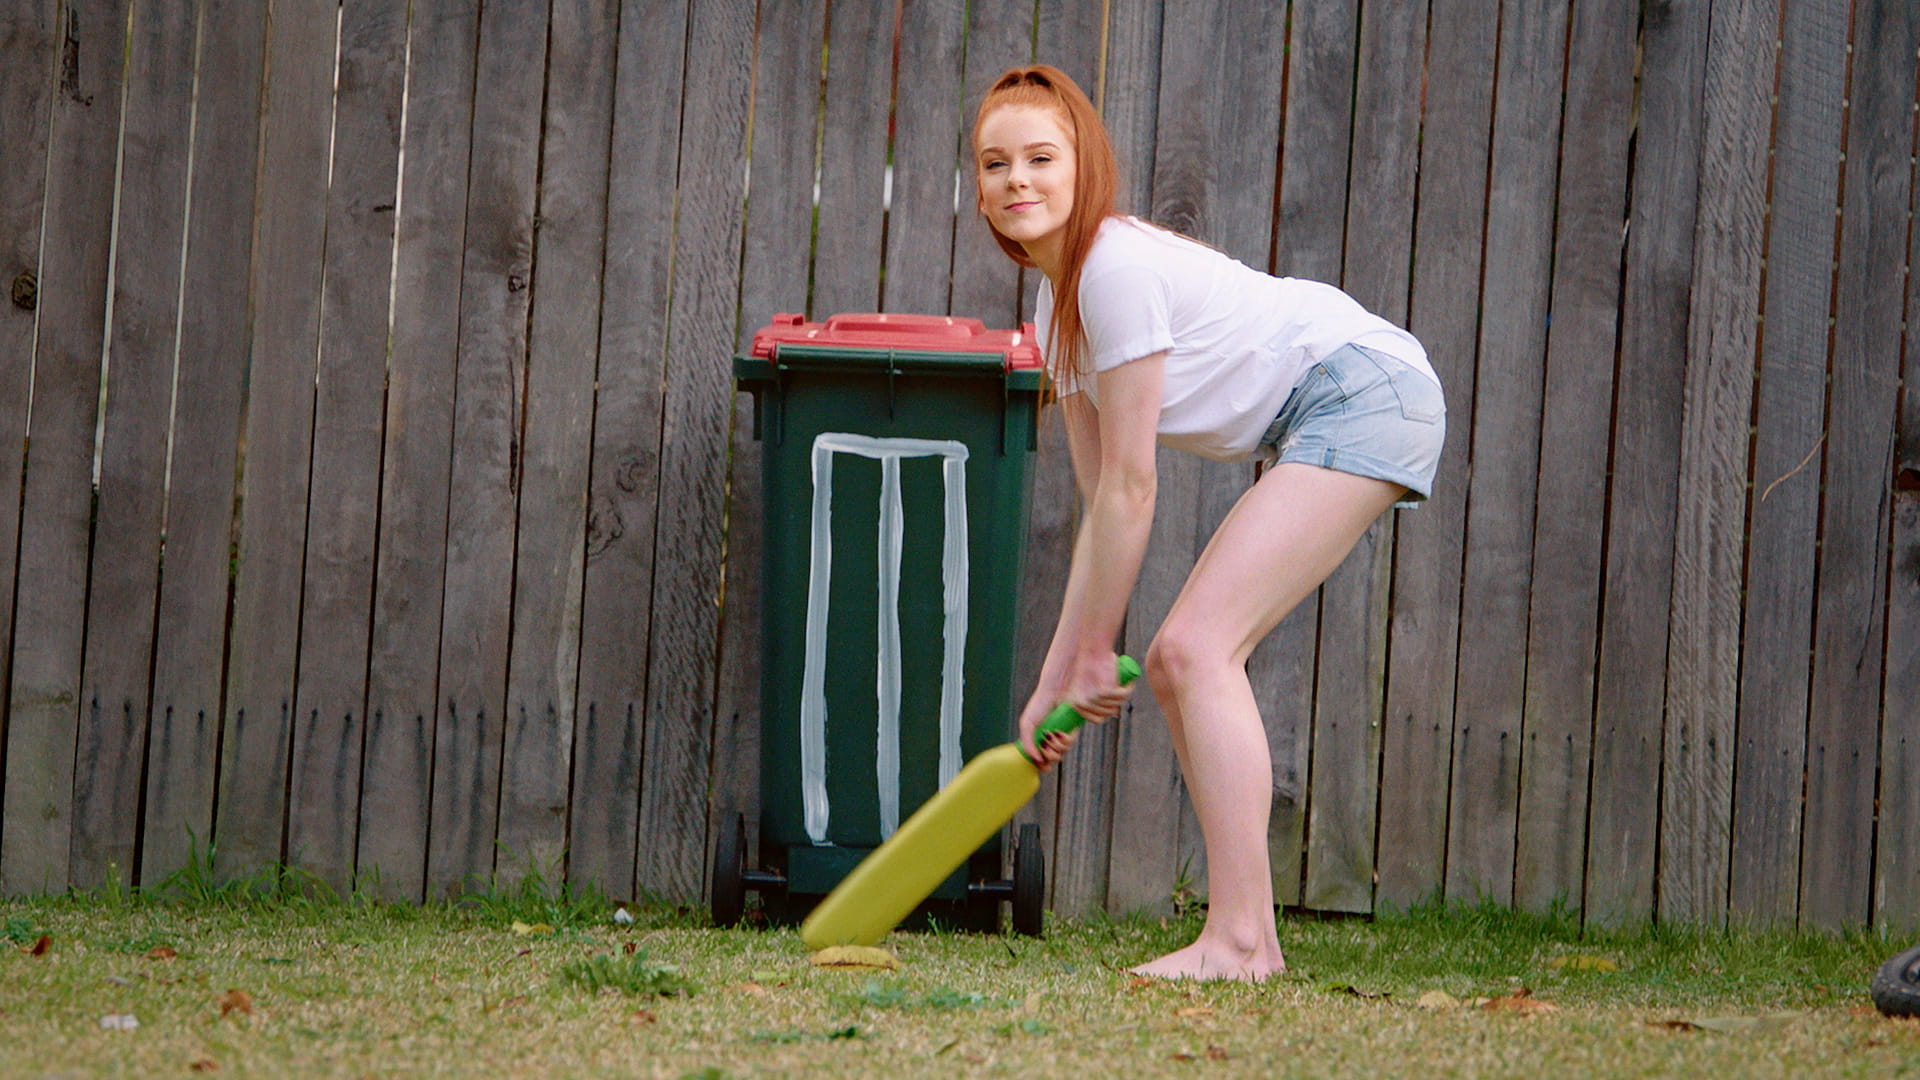 Woman with cricket bat assuming batting stance in front of stumps drawn on a garbage bin.